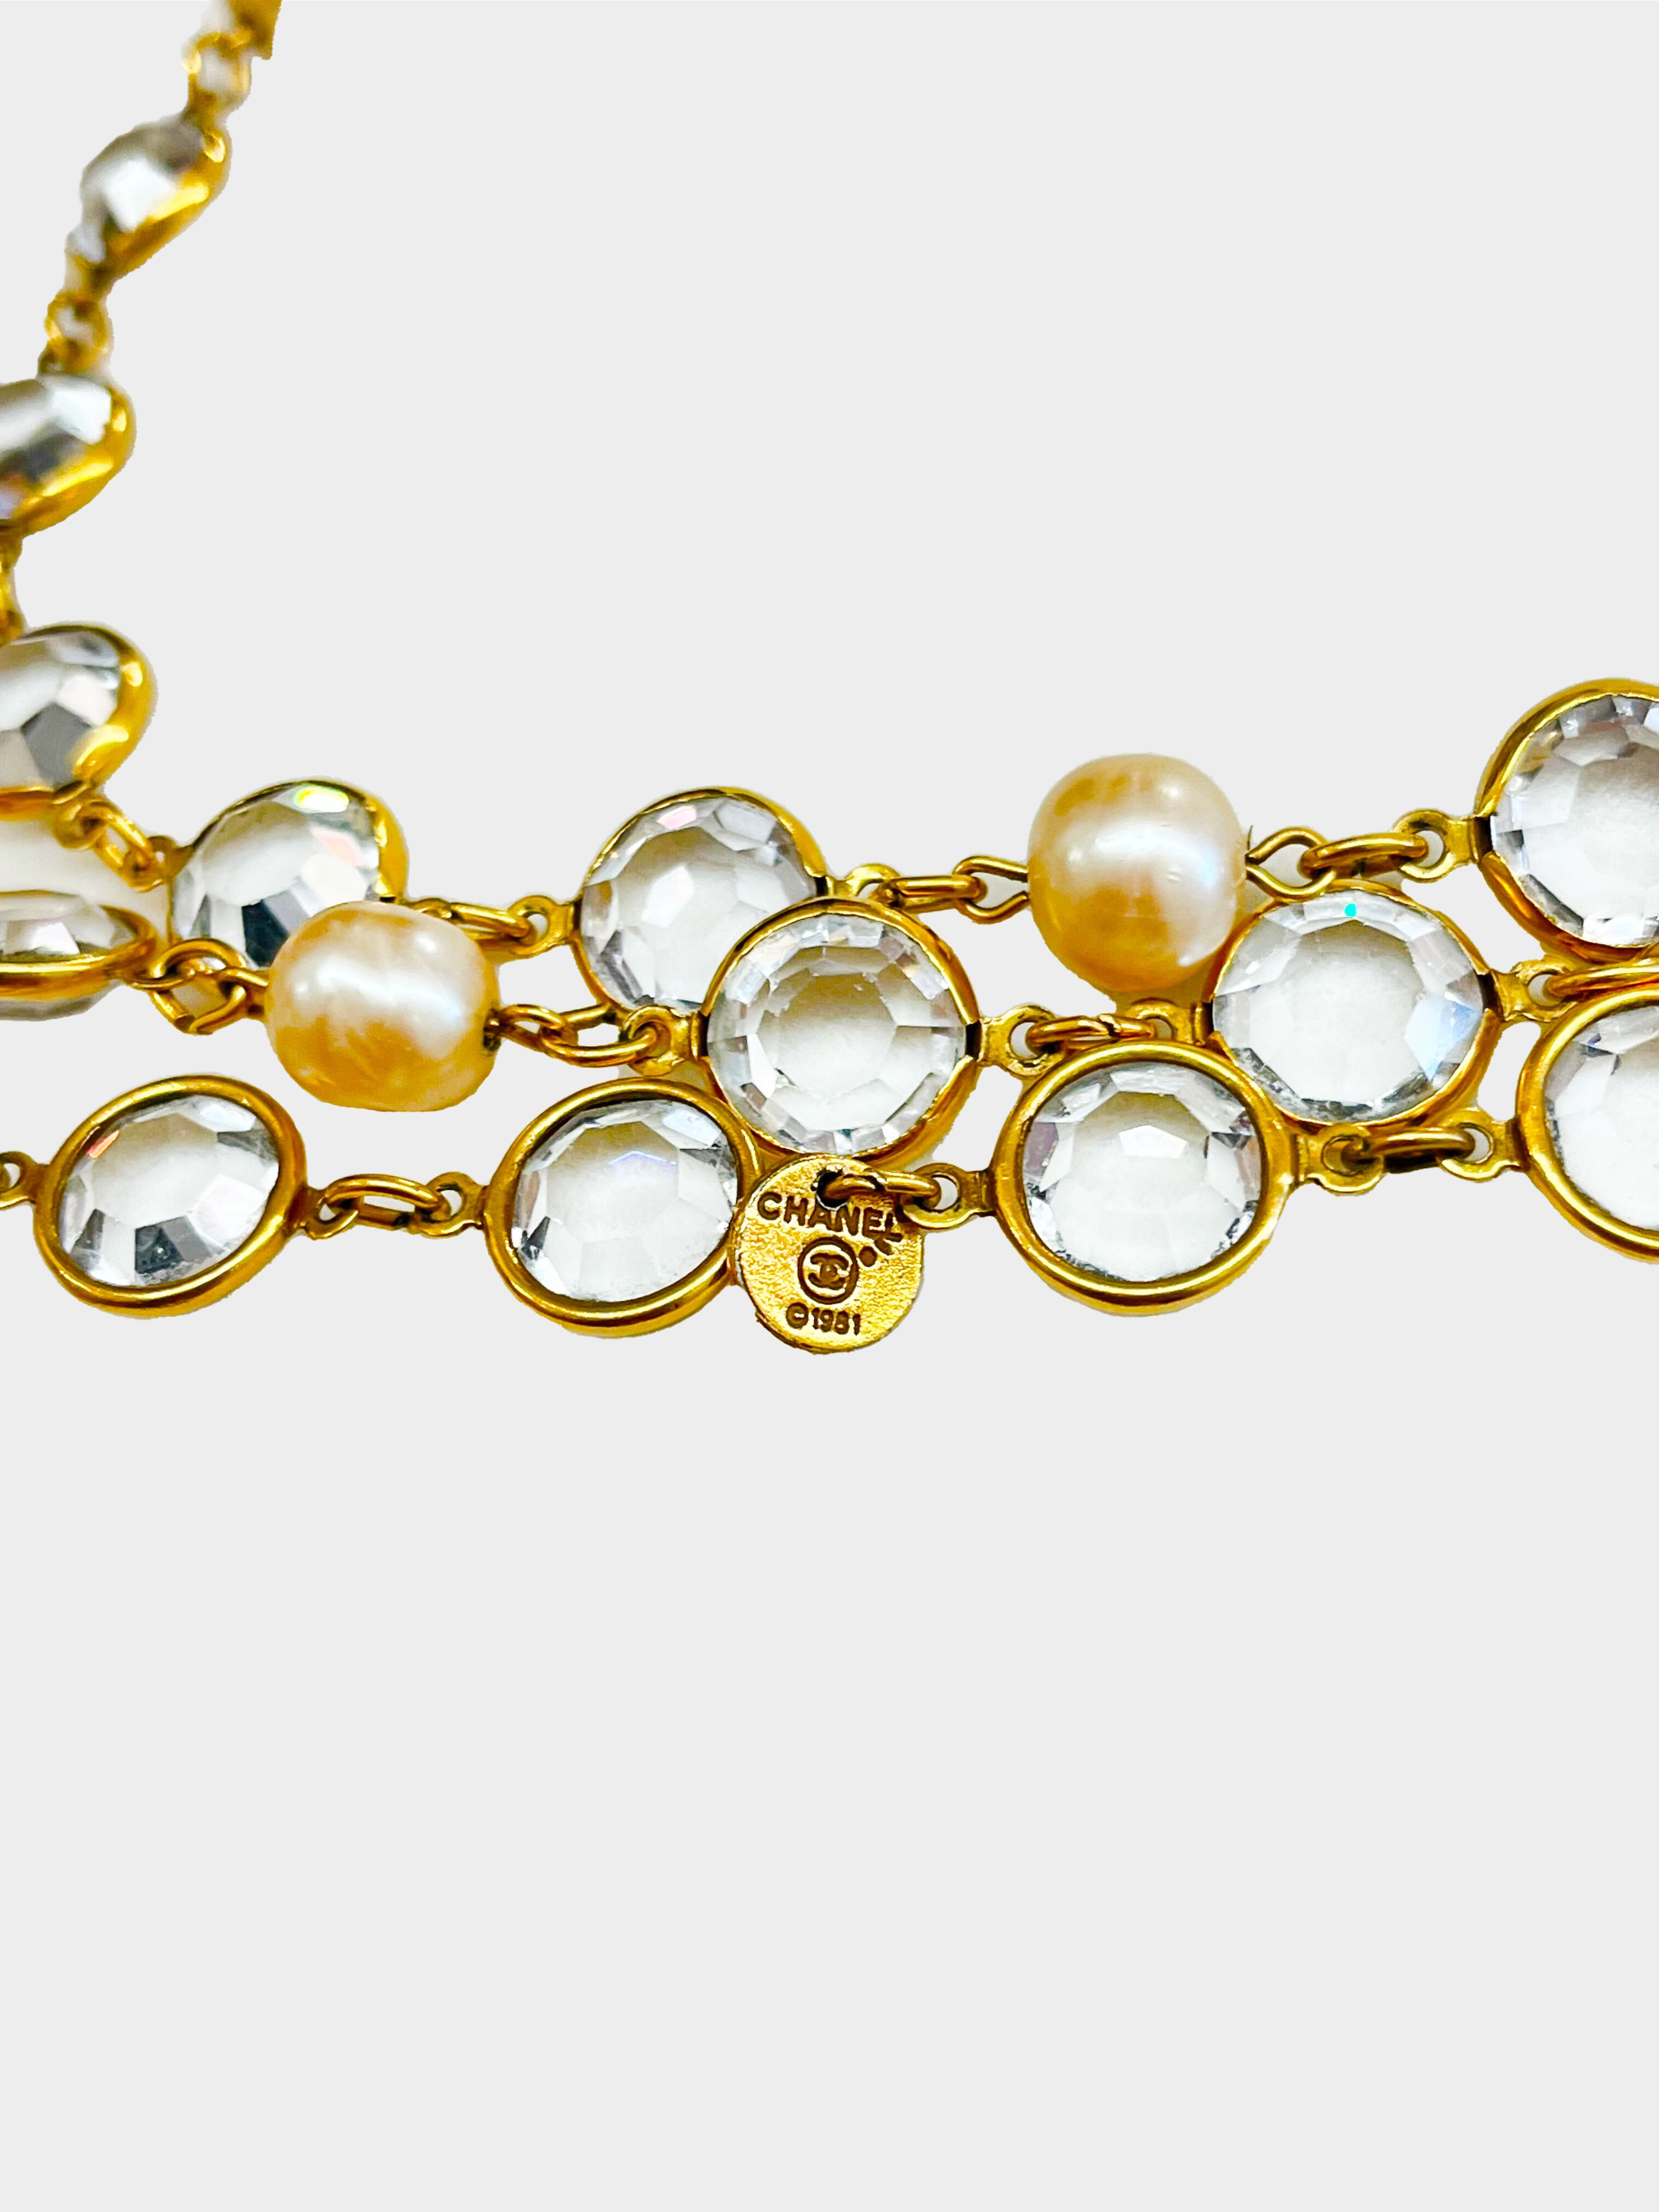 Chanel 1981 Vintage Chartreuse Beveled Crystals and Faux Pearl Sautoir Wrap Necklace